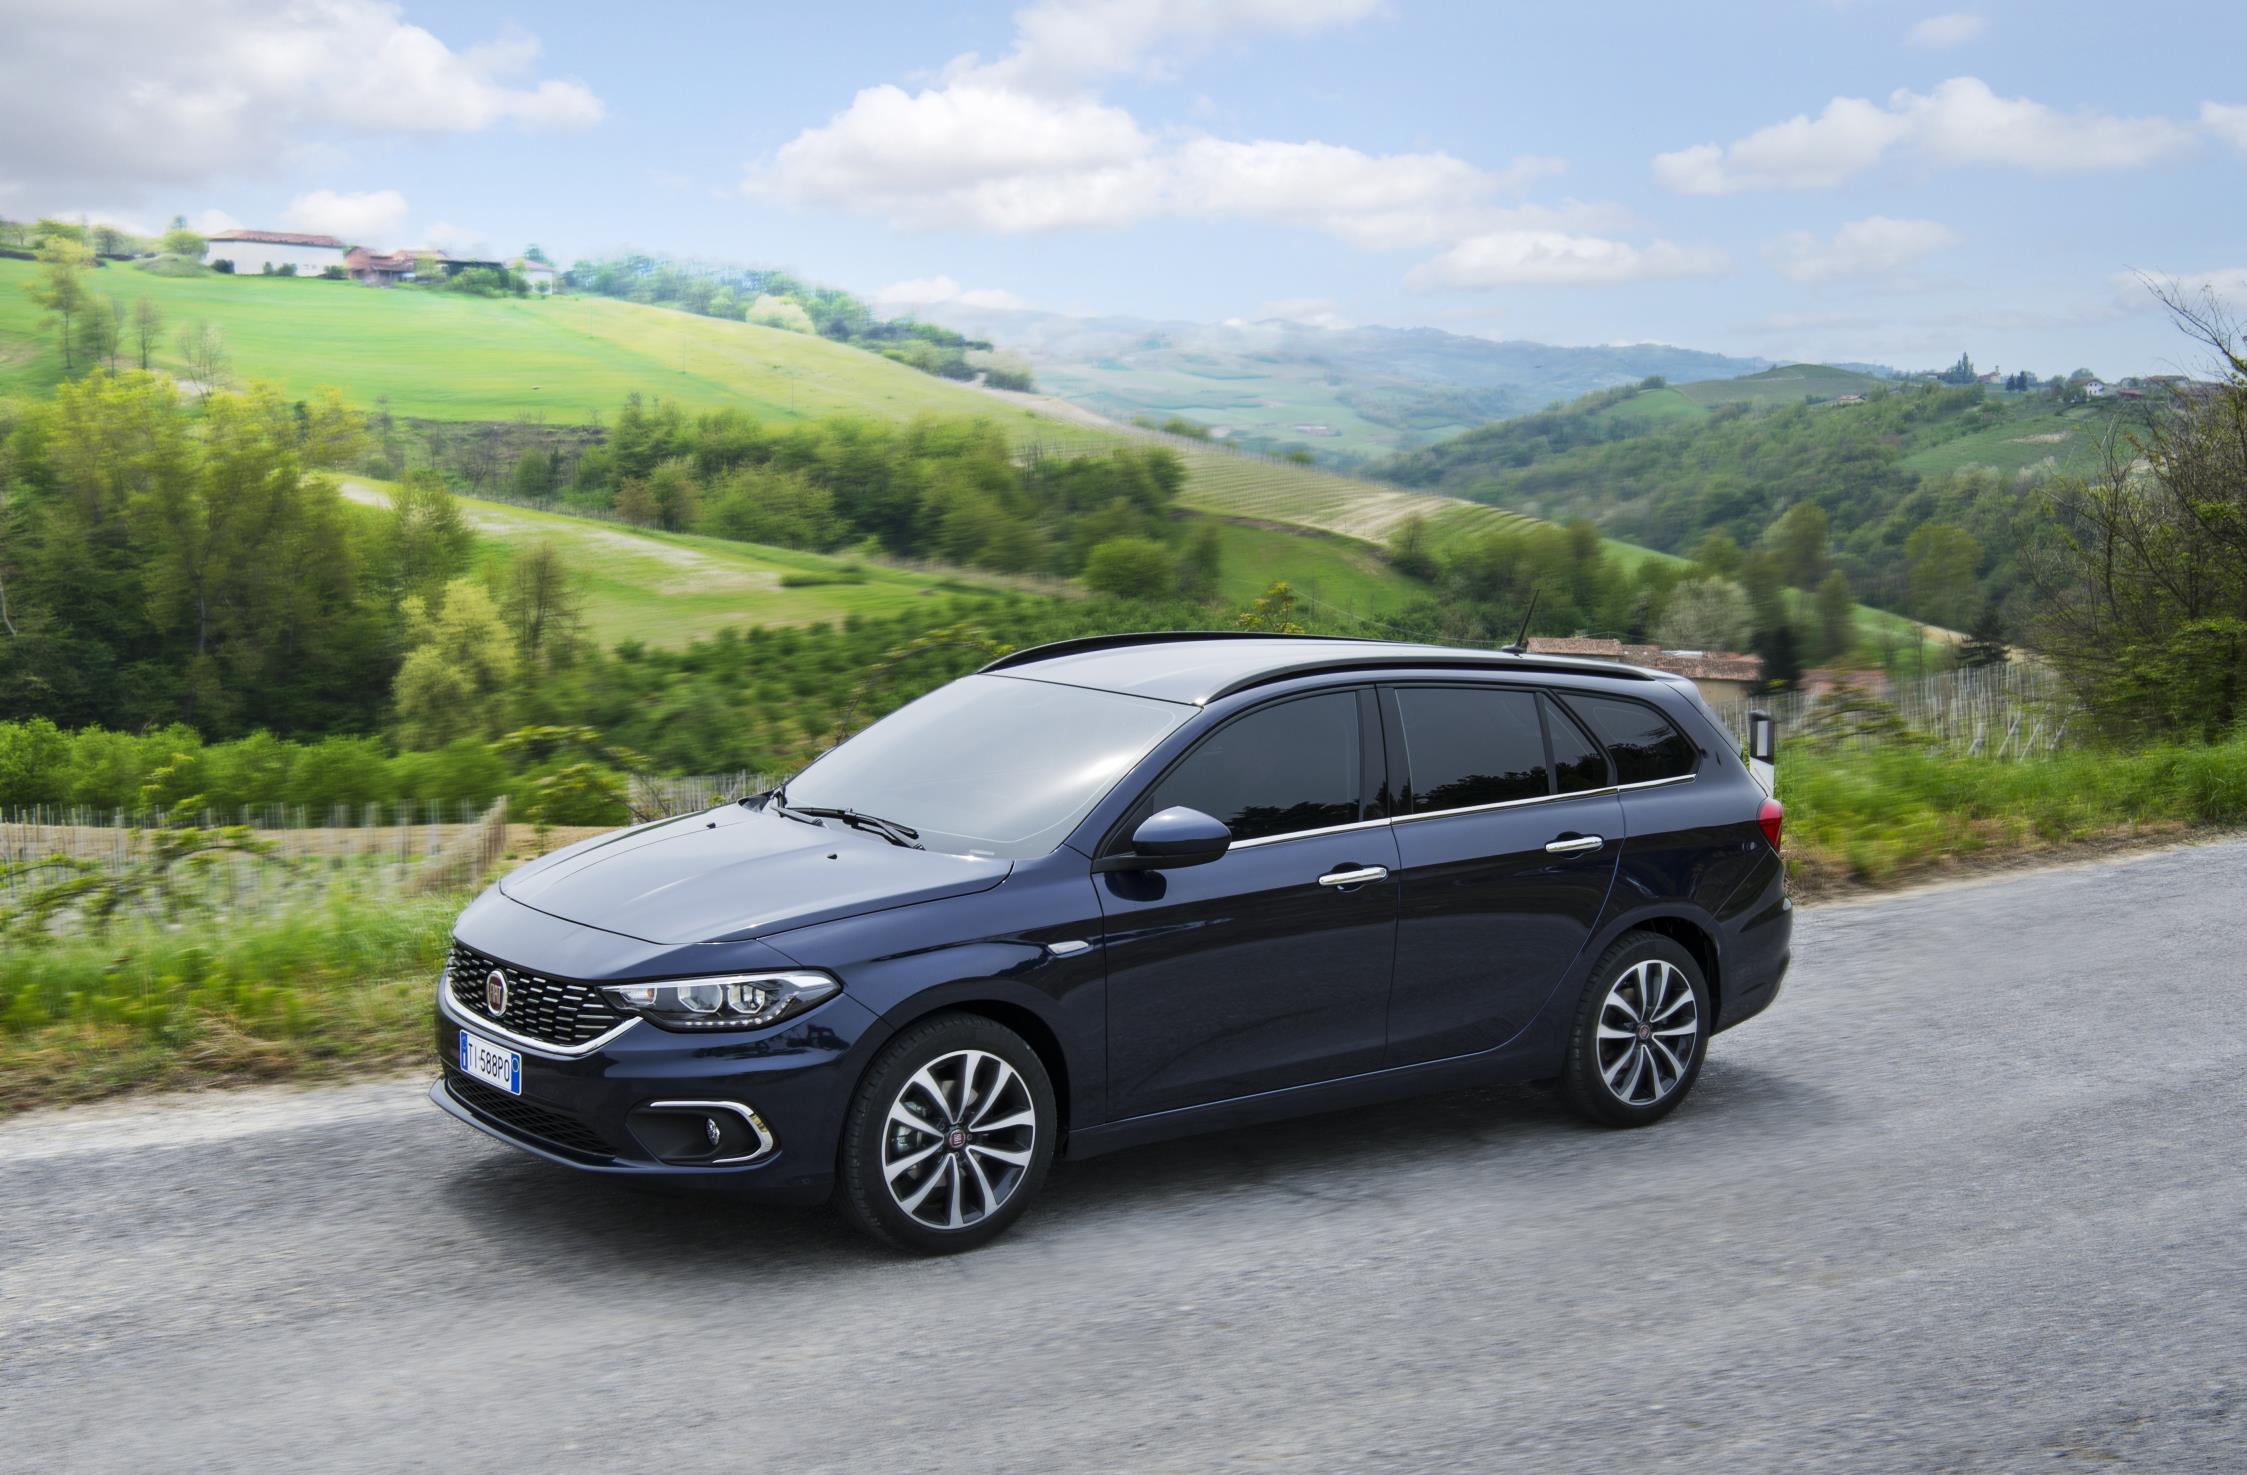 2016 Fiat Tipo Hatchback and Station Wagon Priced in the UK 